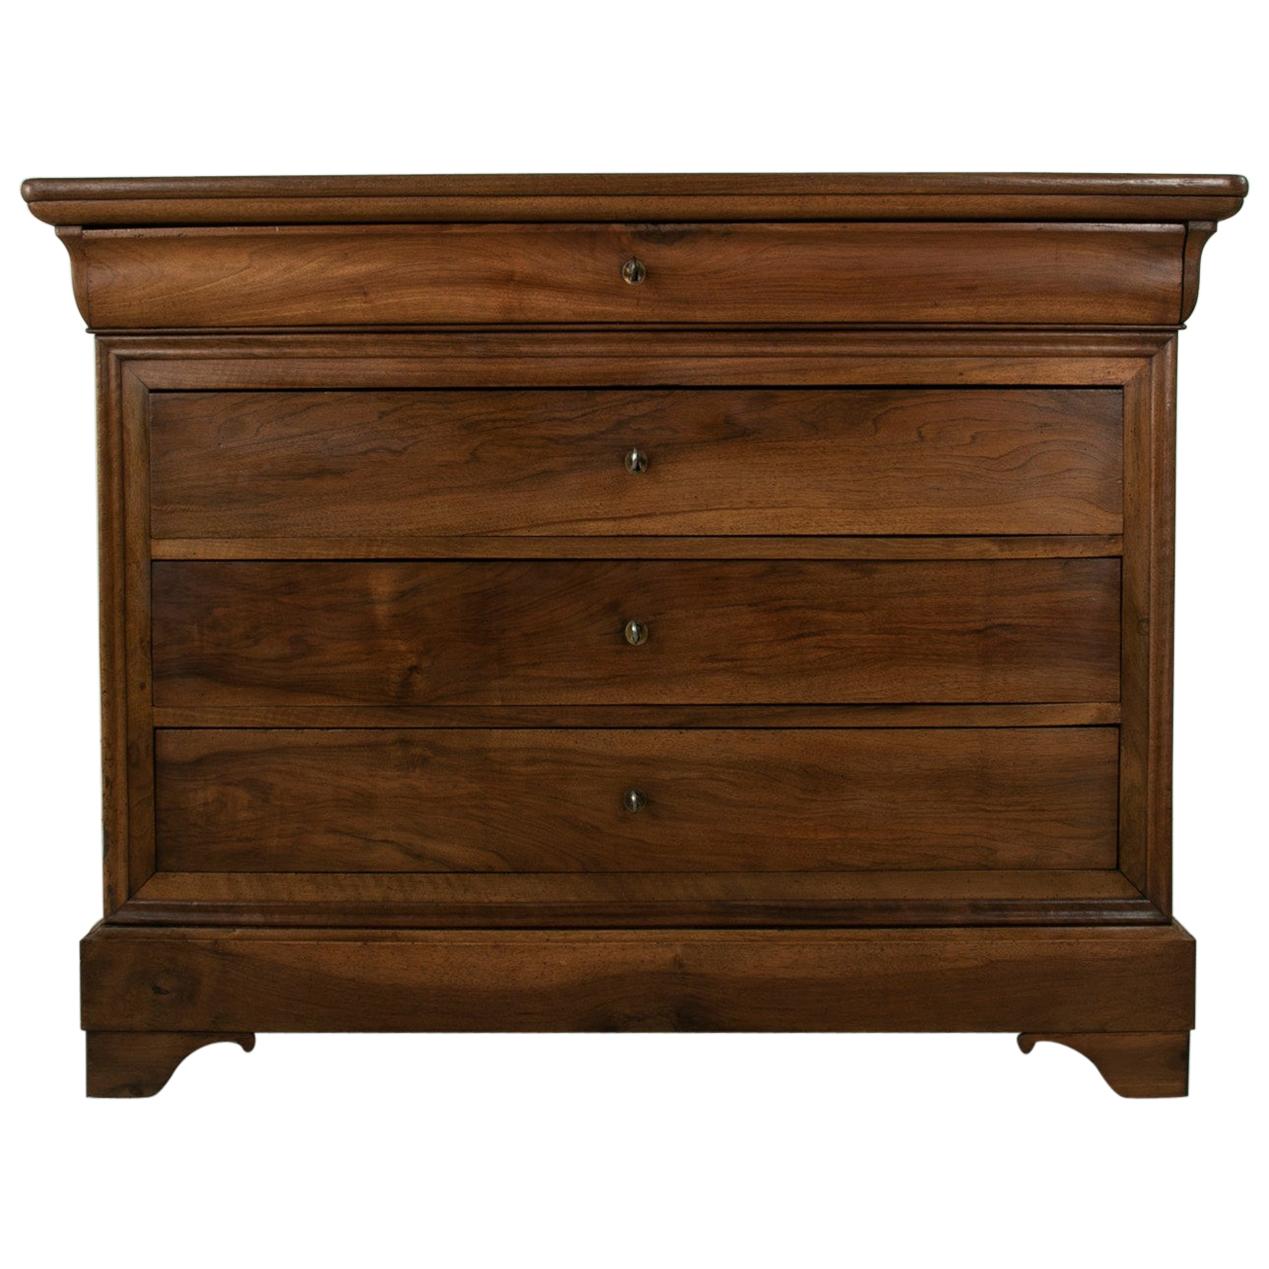 19th Century French Louis Philippe Period Walnut Commode or Chest of Drawers